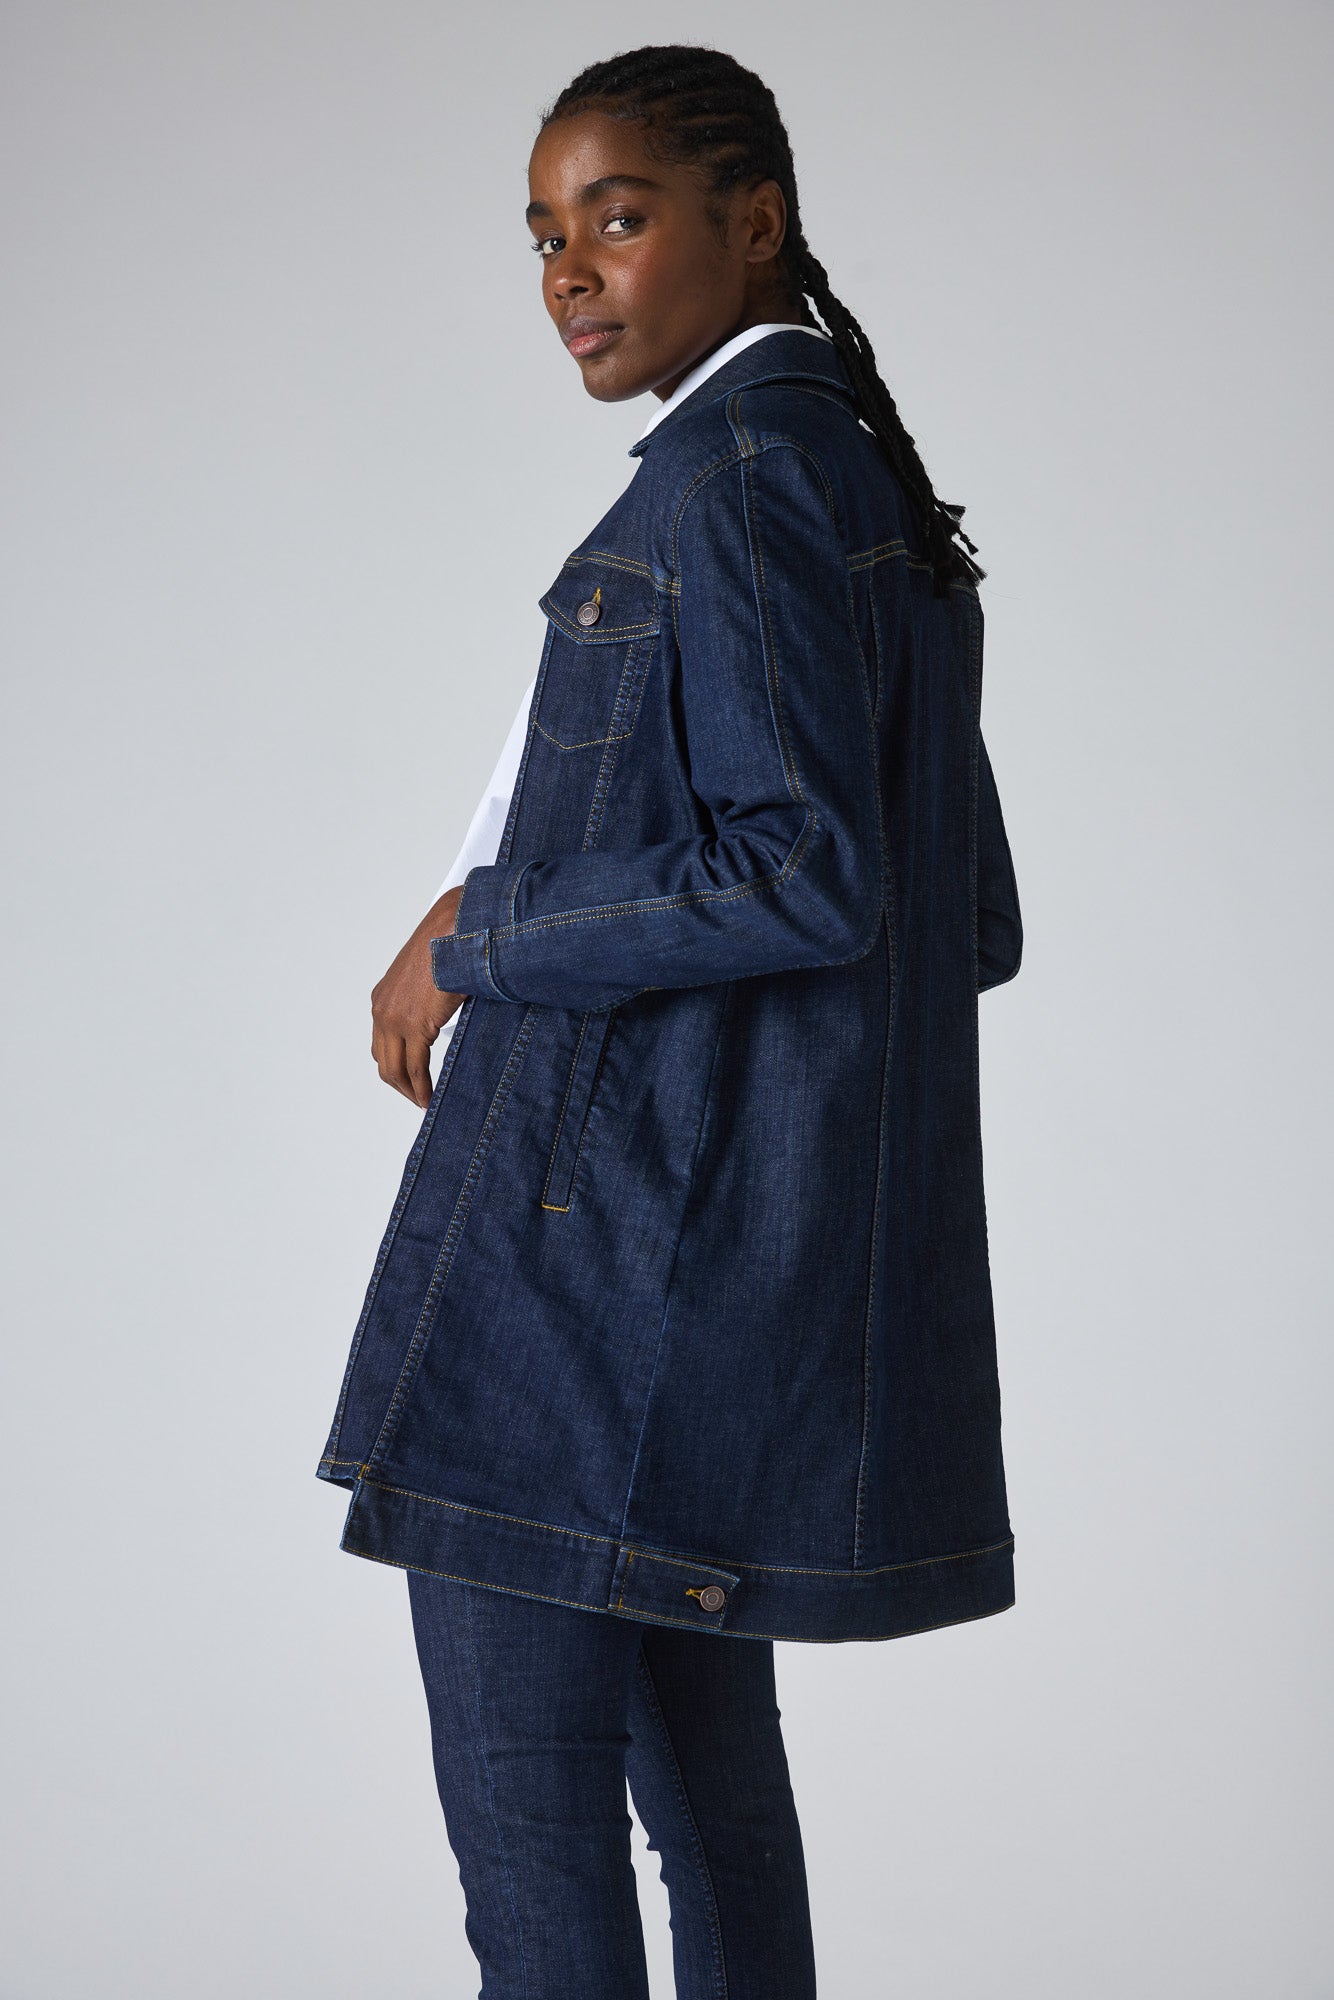 How To Style A Longline Denim Jacket — Miriam Morales